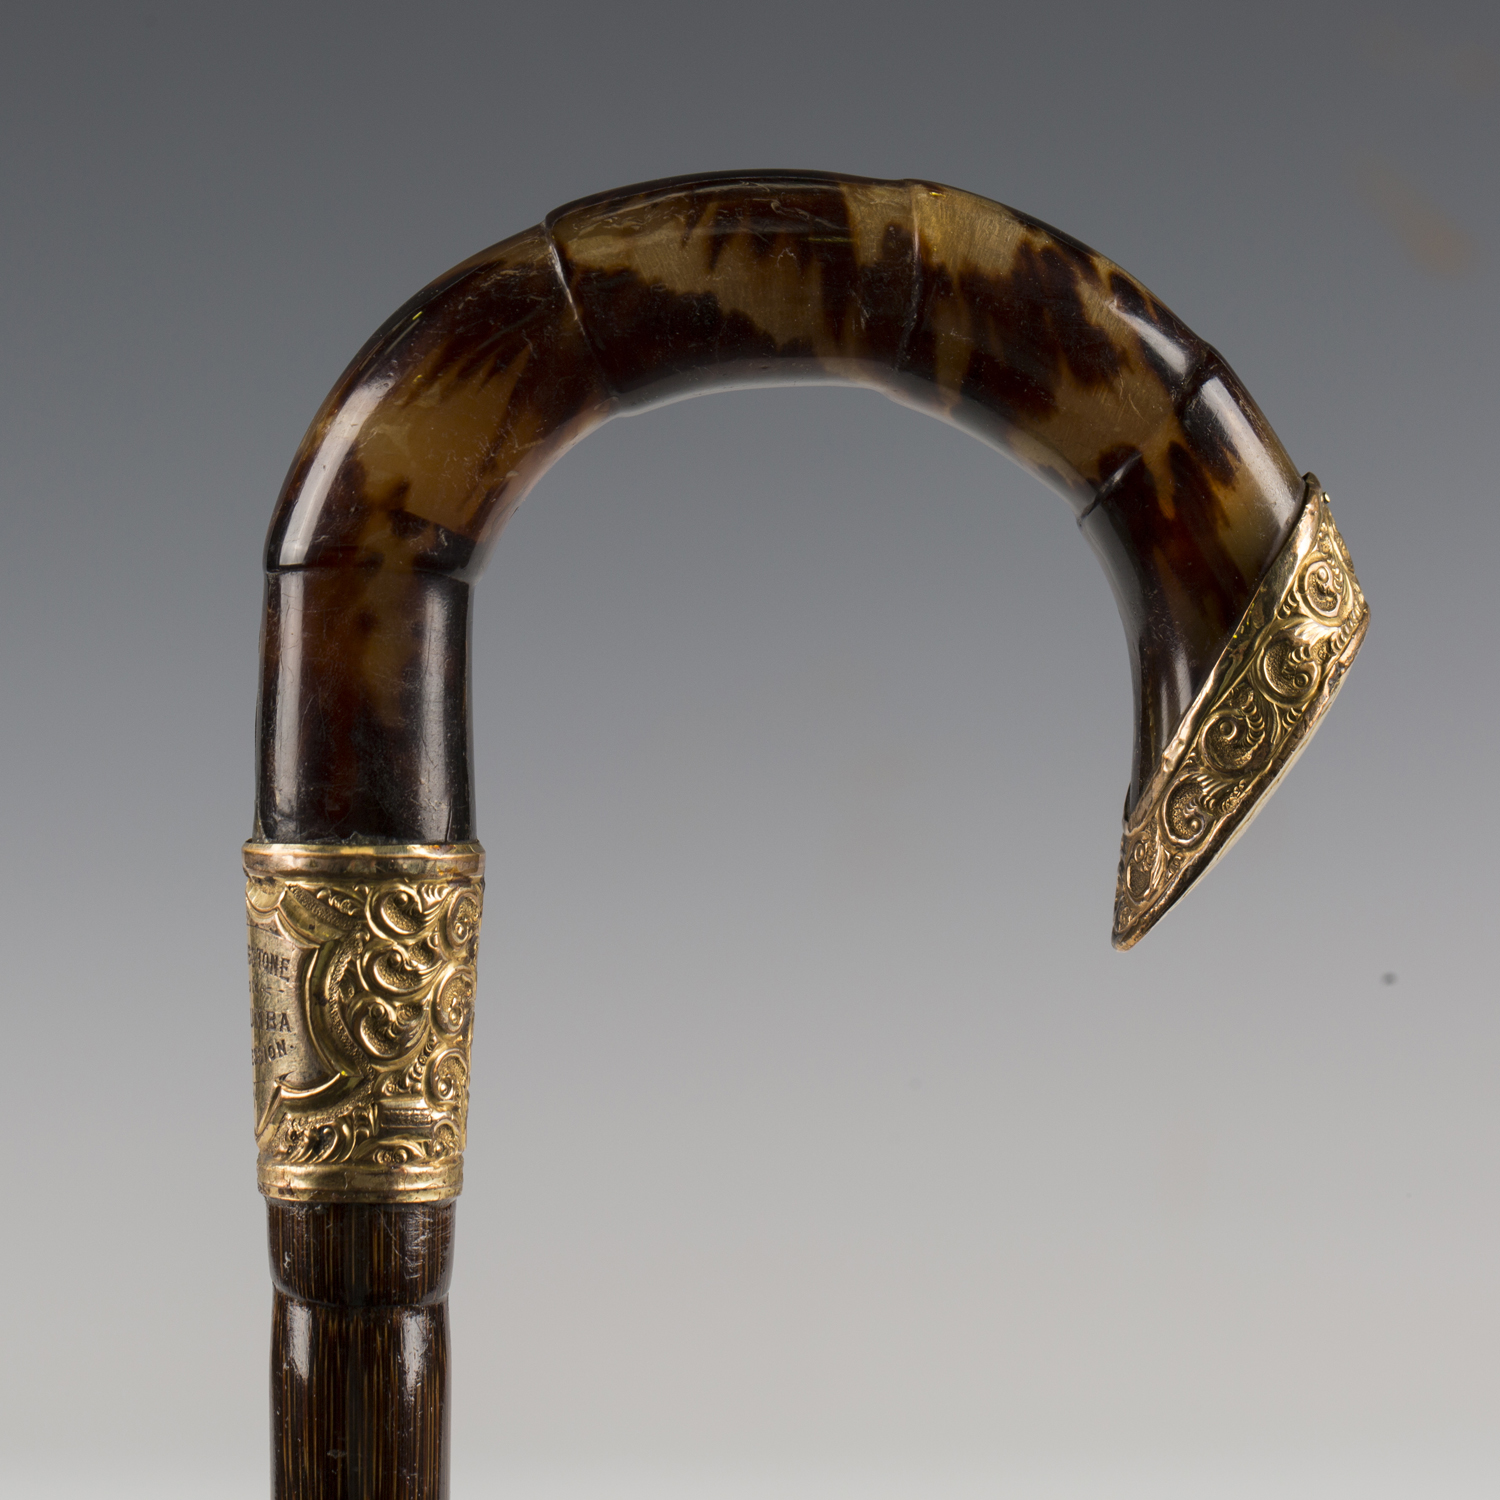 A late 19th century palmwood walking cane, the moulded tortoiseshell handle with gilt metal mount